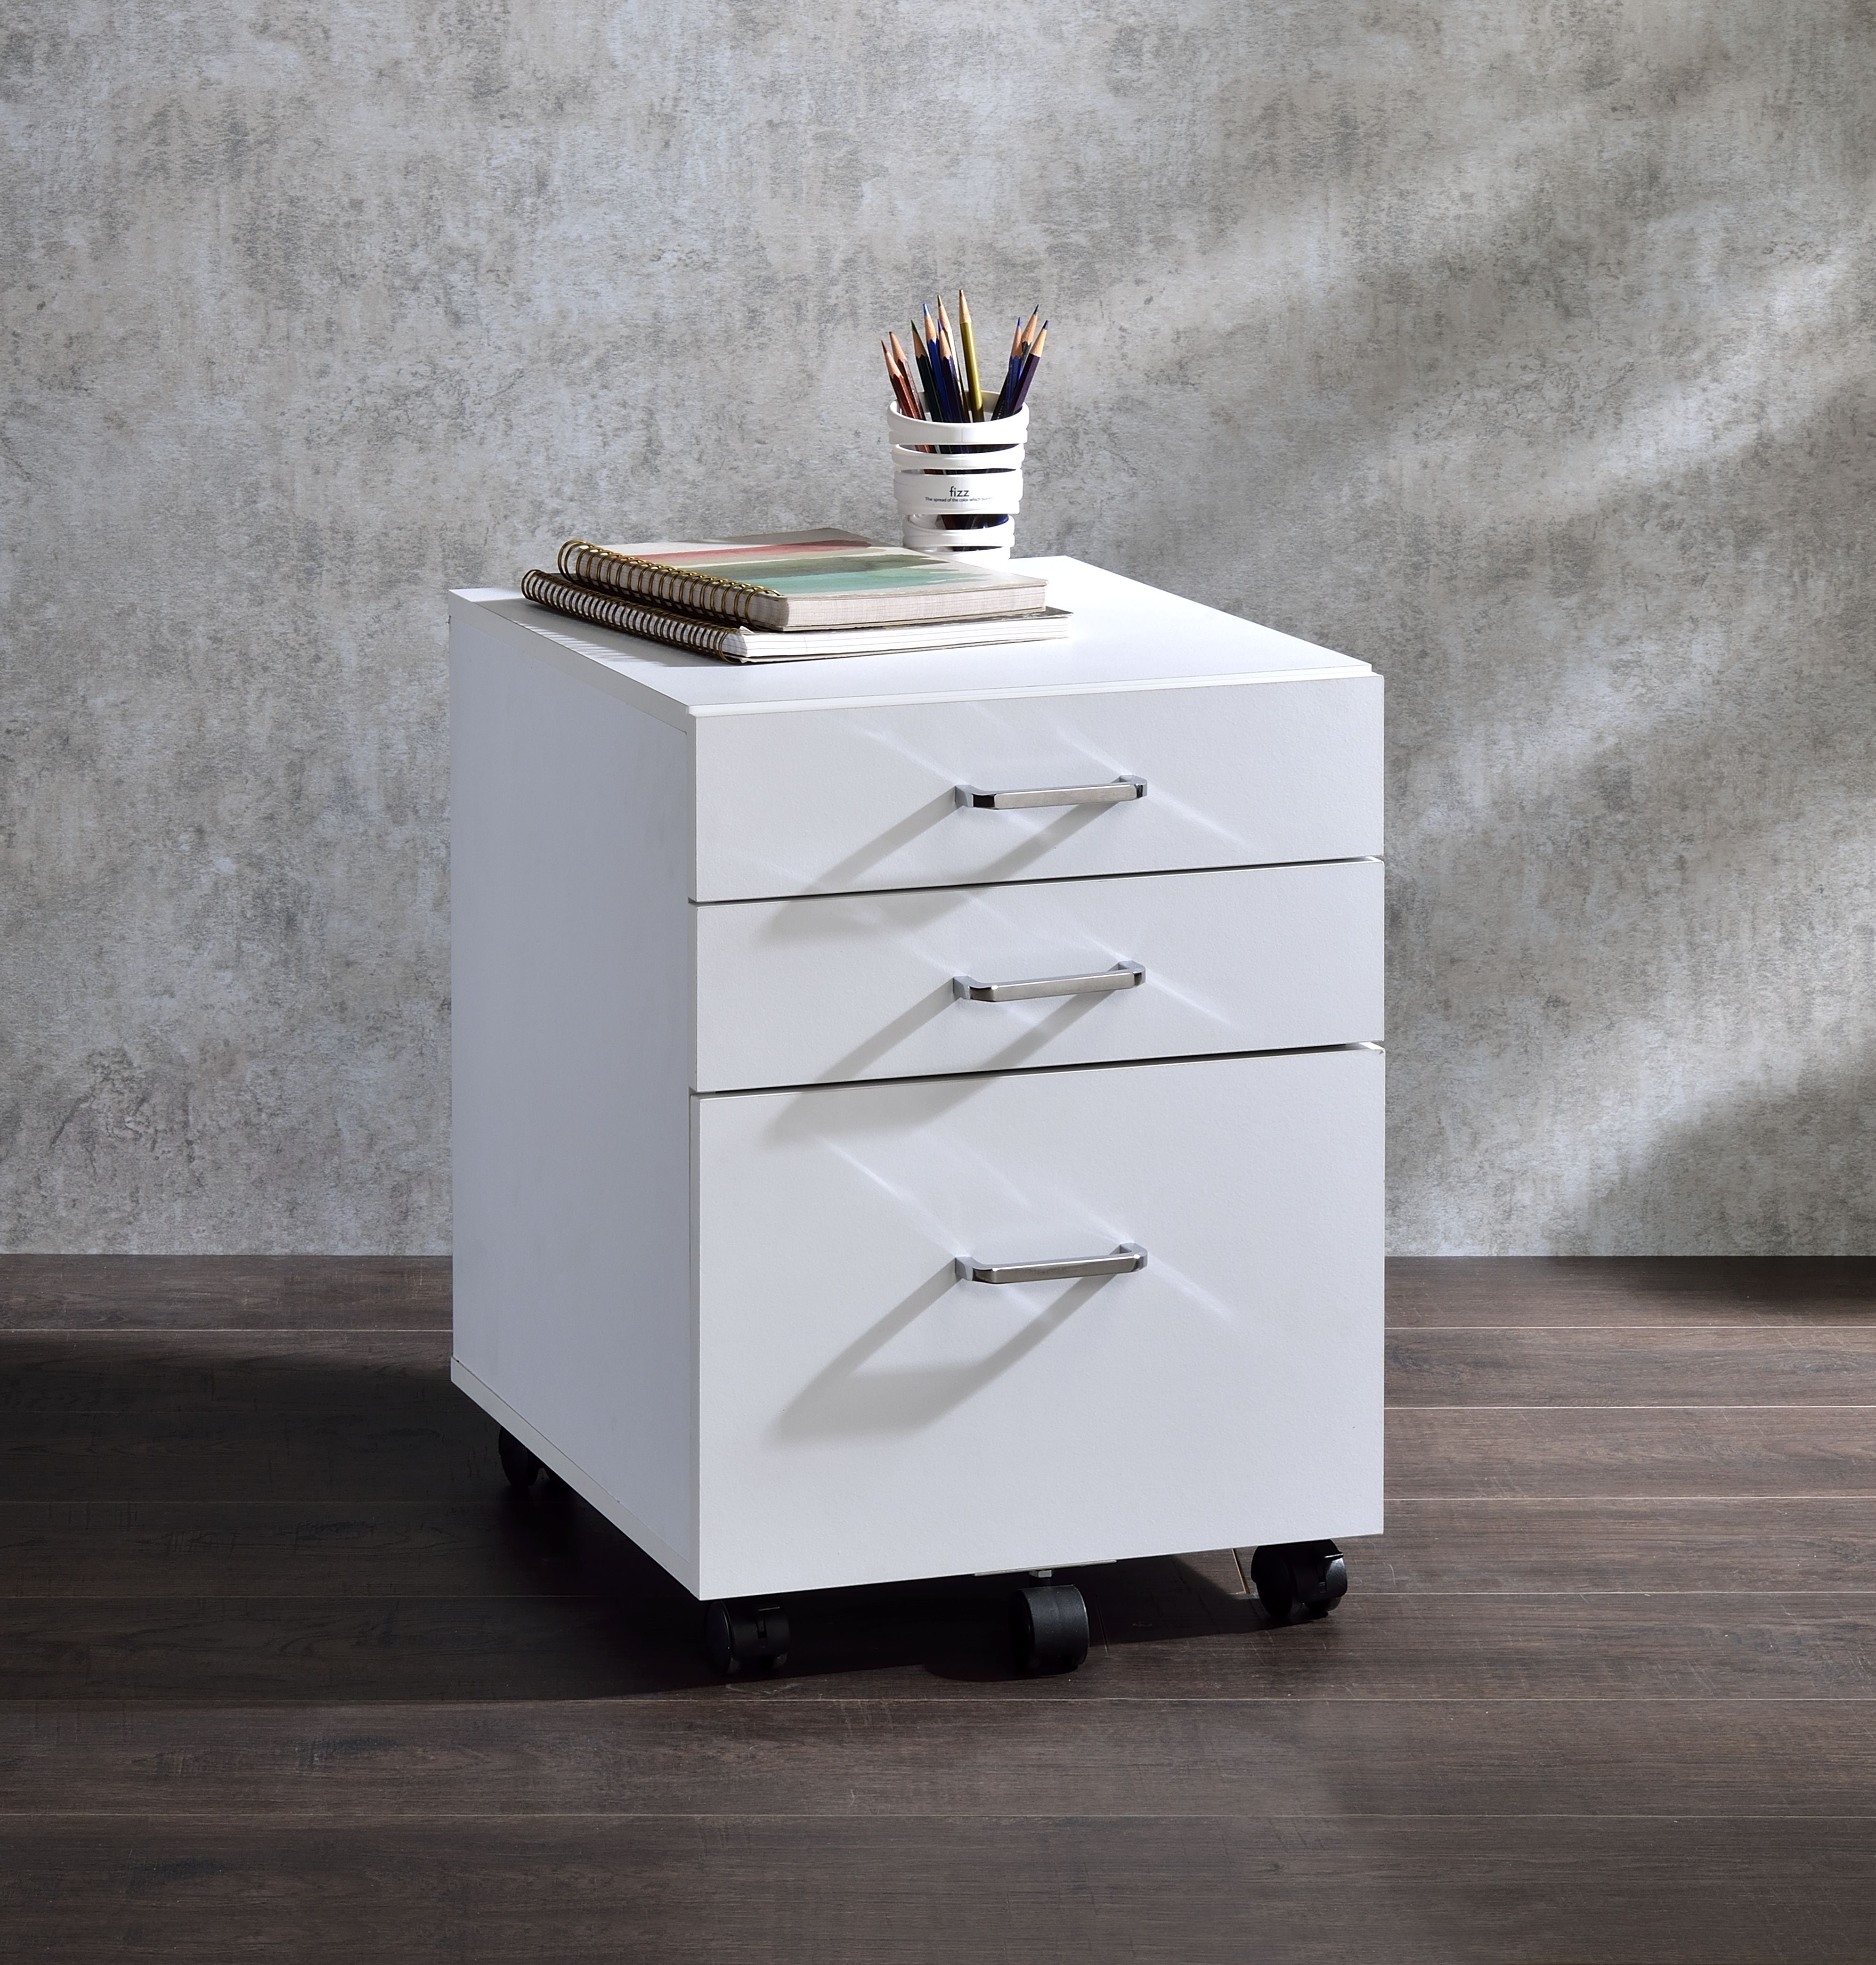 ACME Furniture Buffets & Cabinets - ACME Tennos Cabinet, White & Chrome Finish